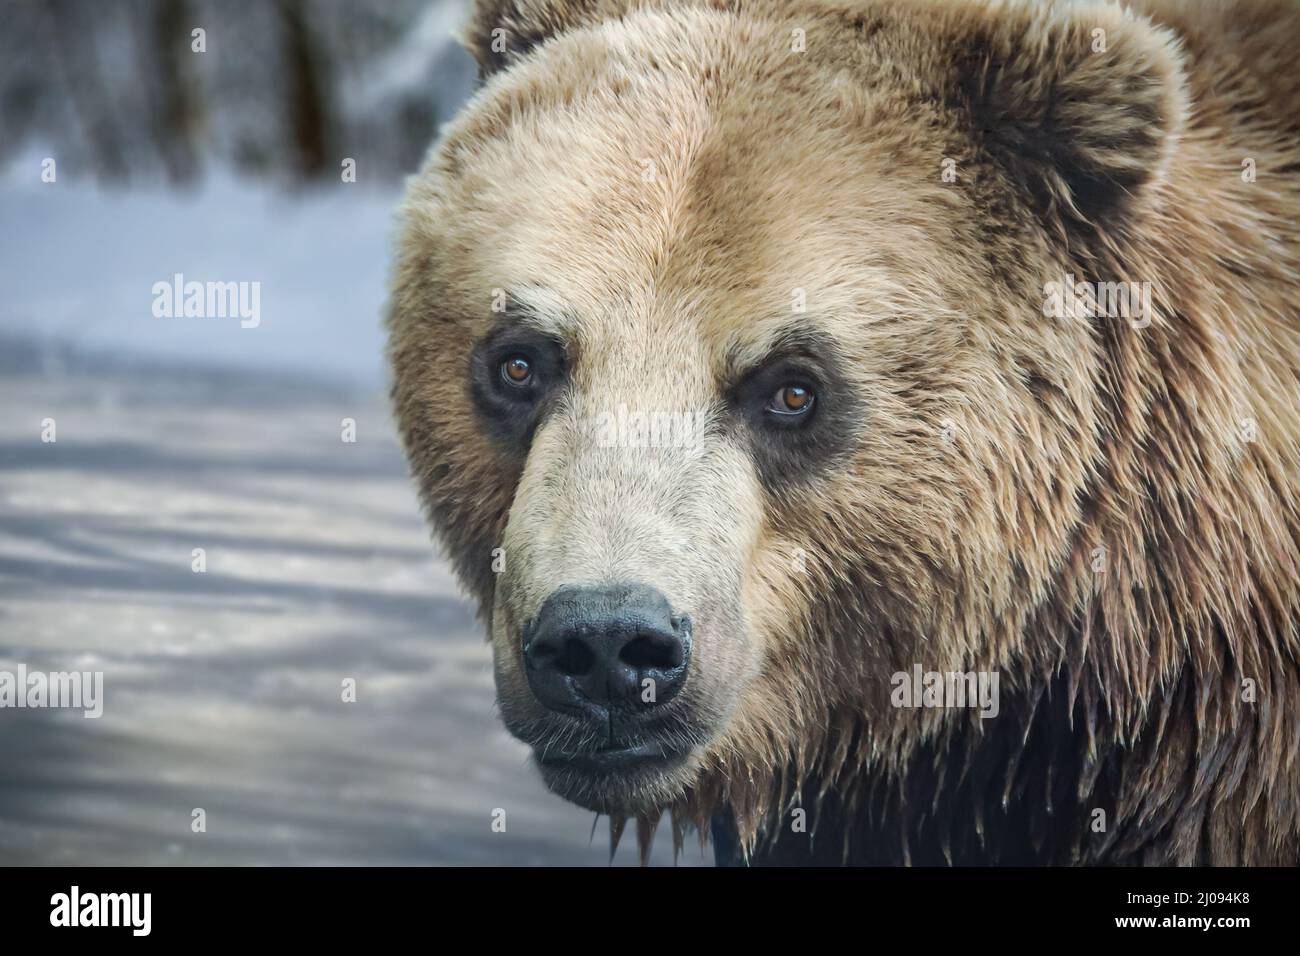 The big head of a brown bear in front of a frozen pond. The bear keeps eye contact with the camera. Its fur is wet. Stock Photo